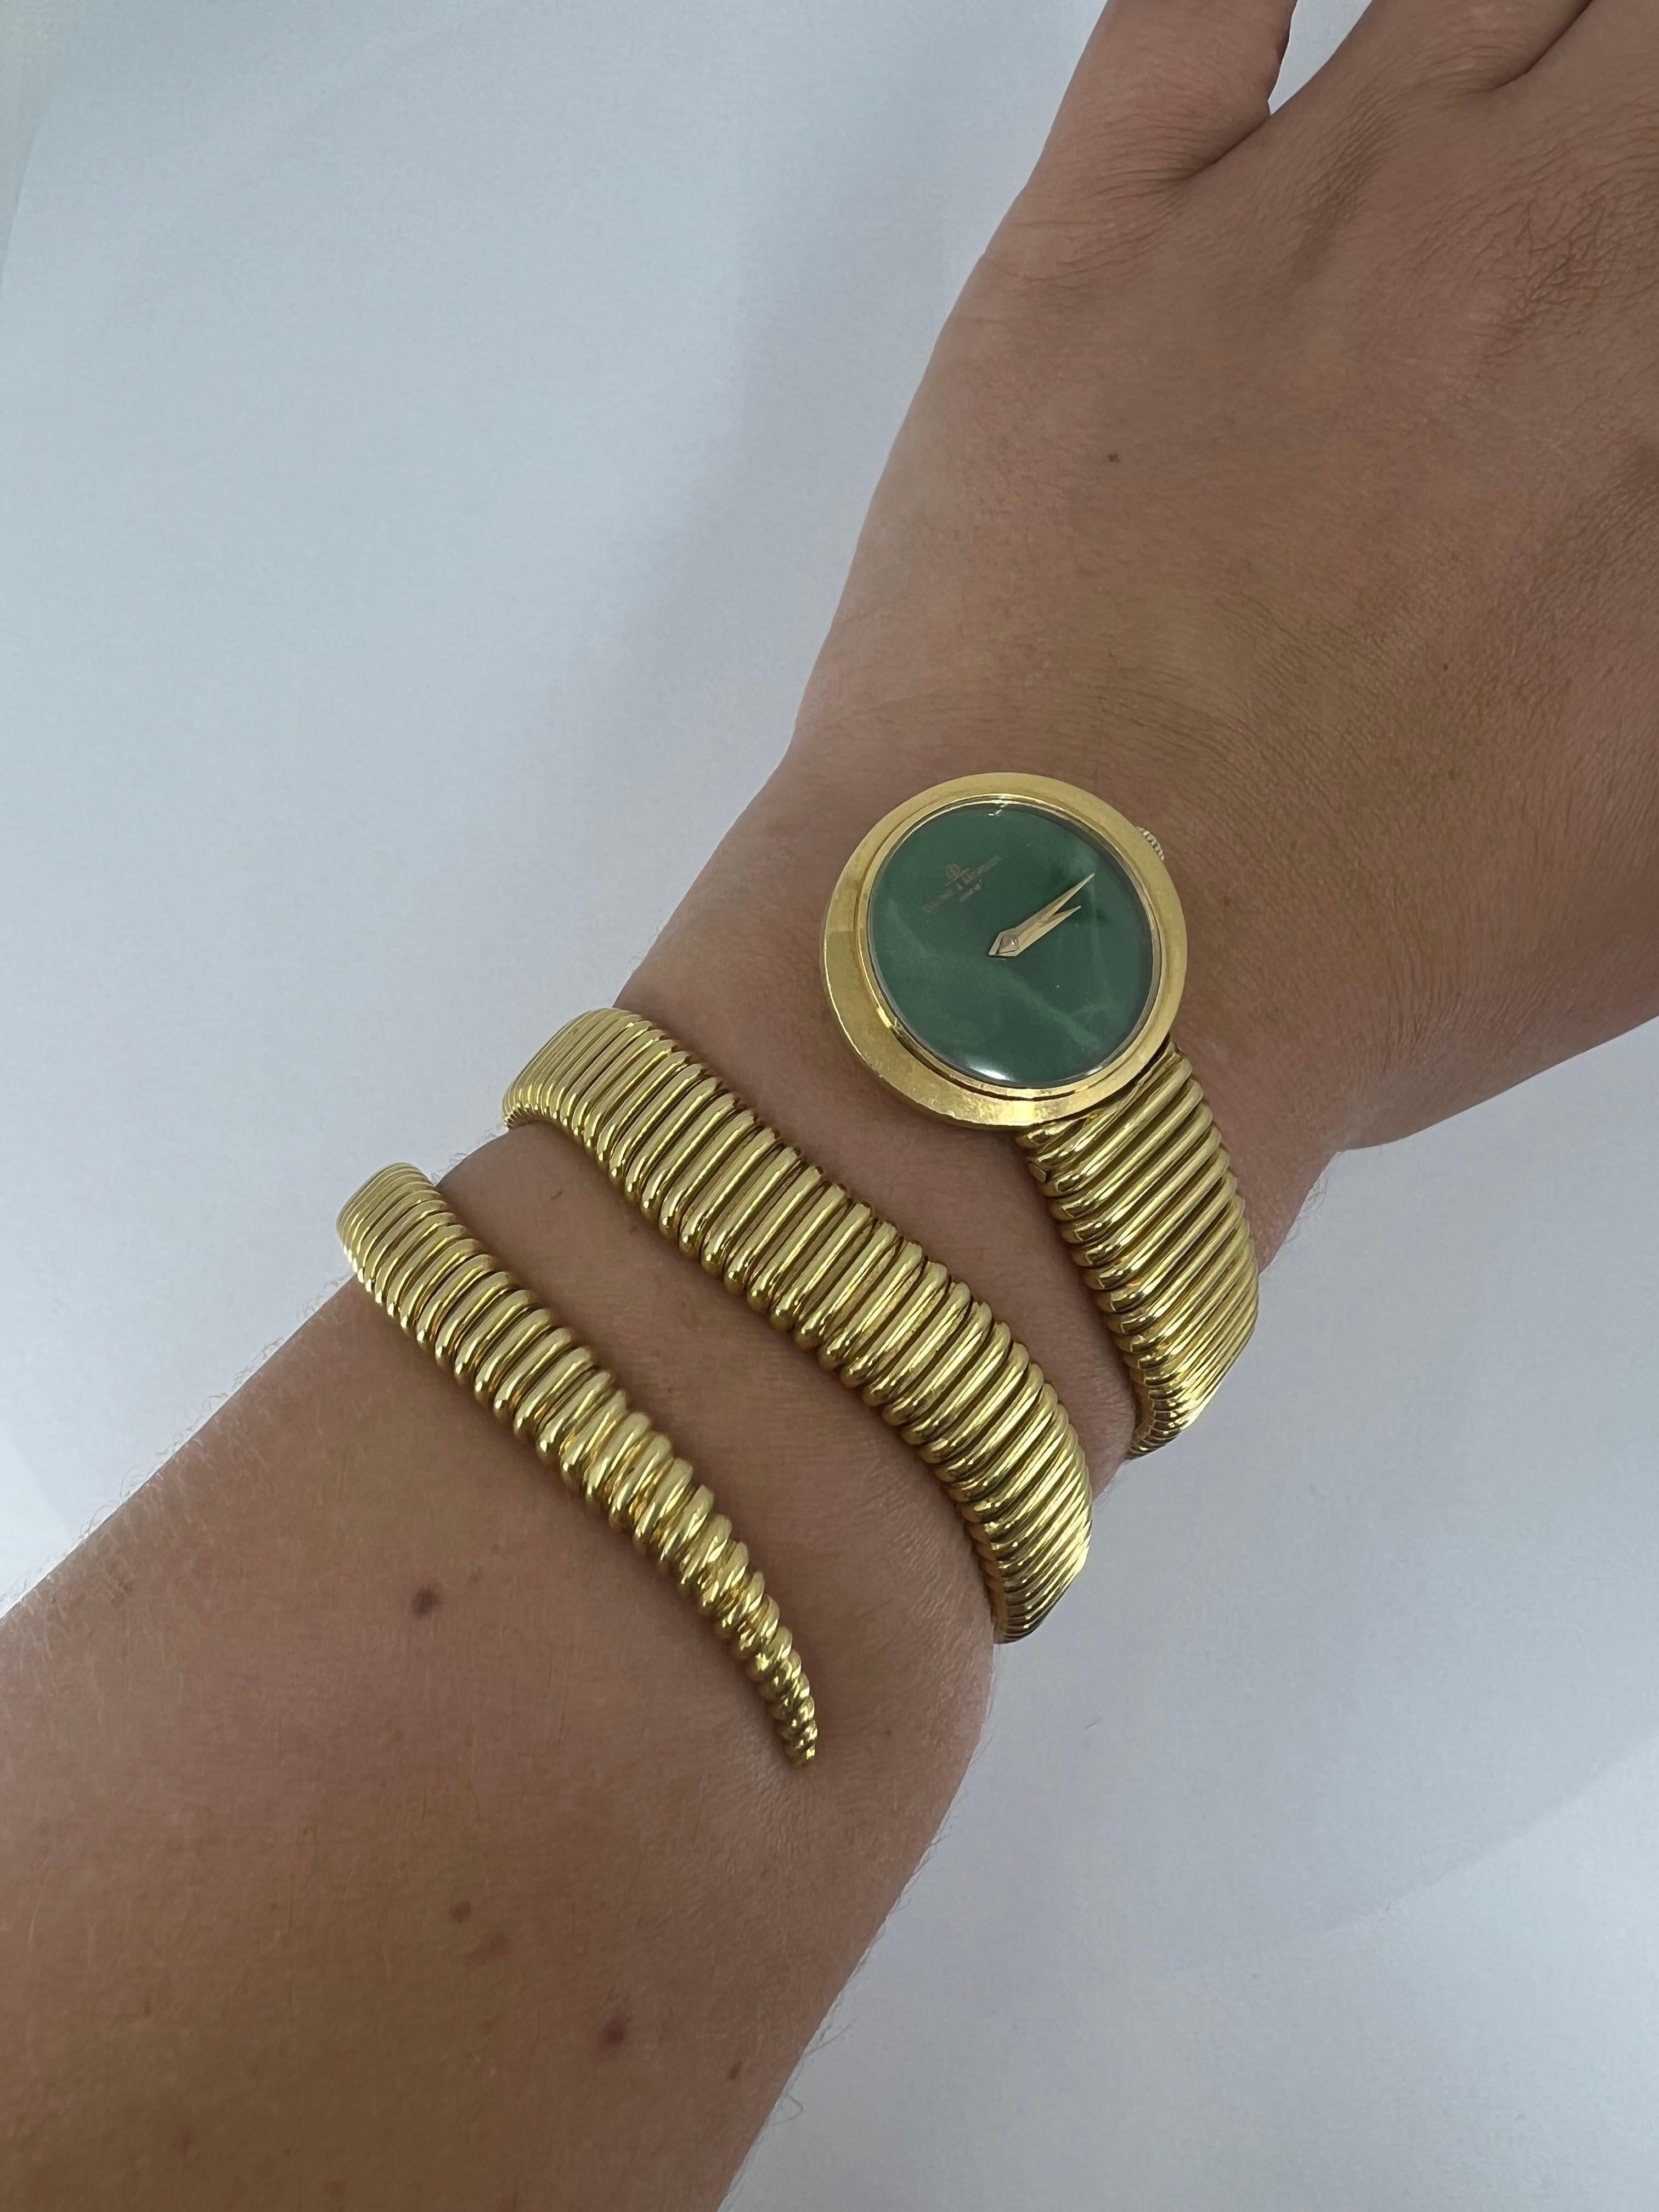 A luxurious timepiece by Baume et Mercier. The watch is made of 18k gold, features a malachite face.

The watch’s bracelet of Tubogas design with slightly wavy lines looks very feminine. It’s flat and refined, which works great with the elliptical